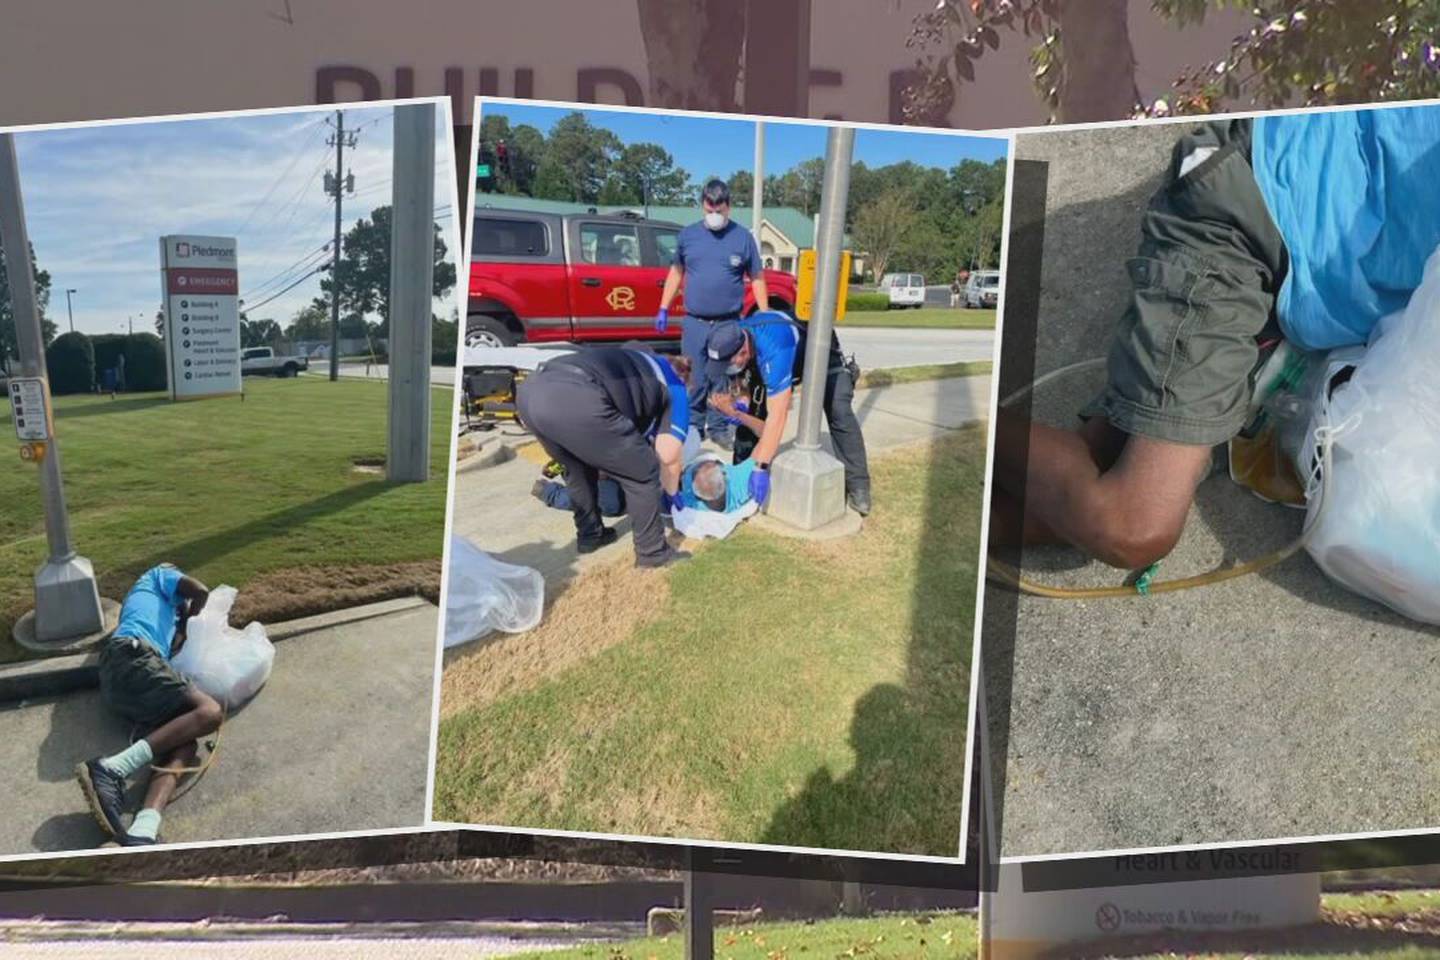 Channel 2′s Mark Winne was in Conyers Friday, where someone called 911 after finding the man collapsed on Milstead Avenue in Conyers, just steps fro